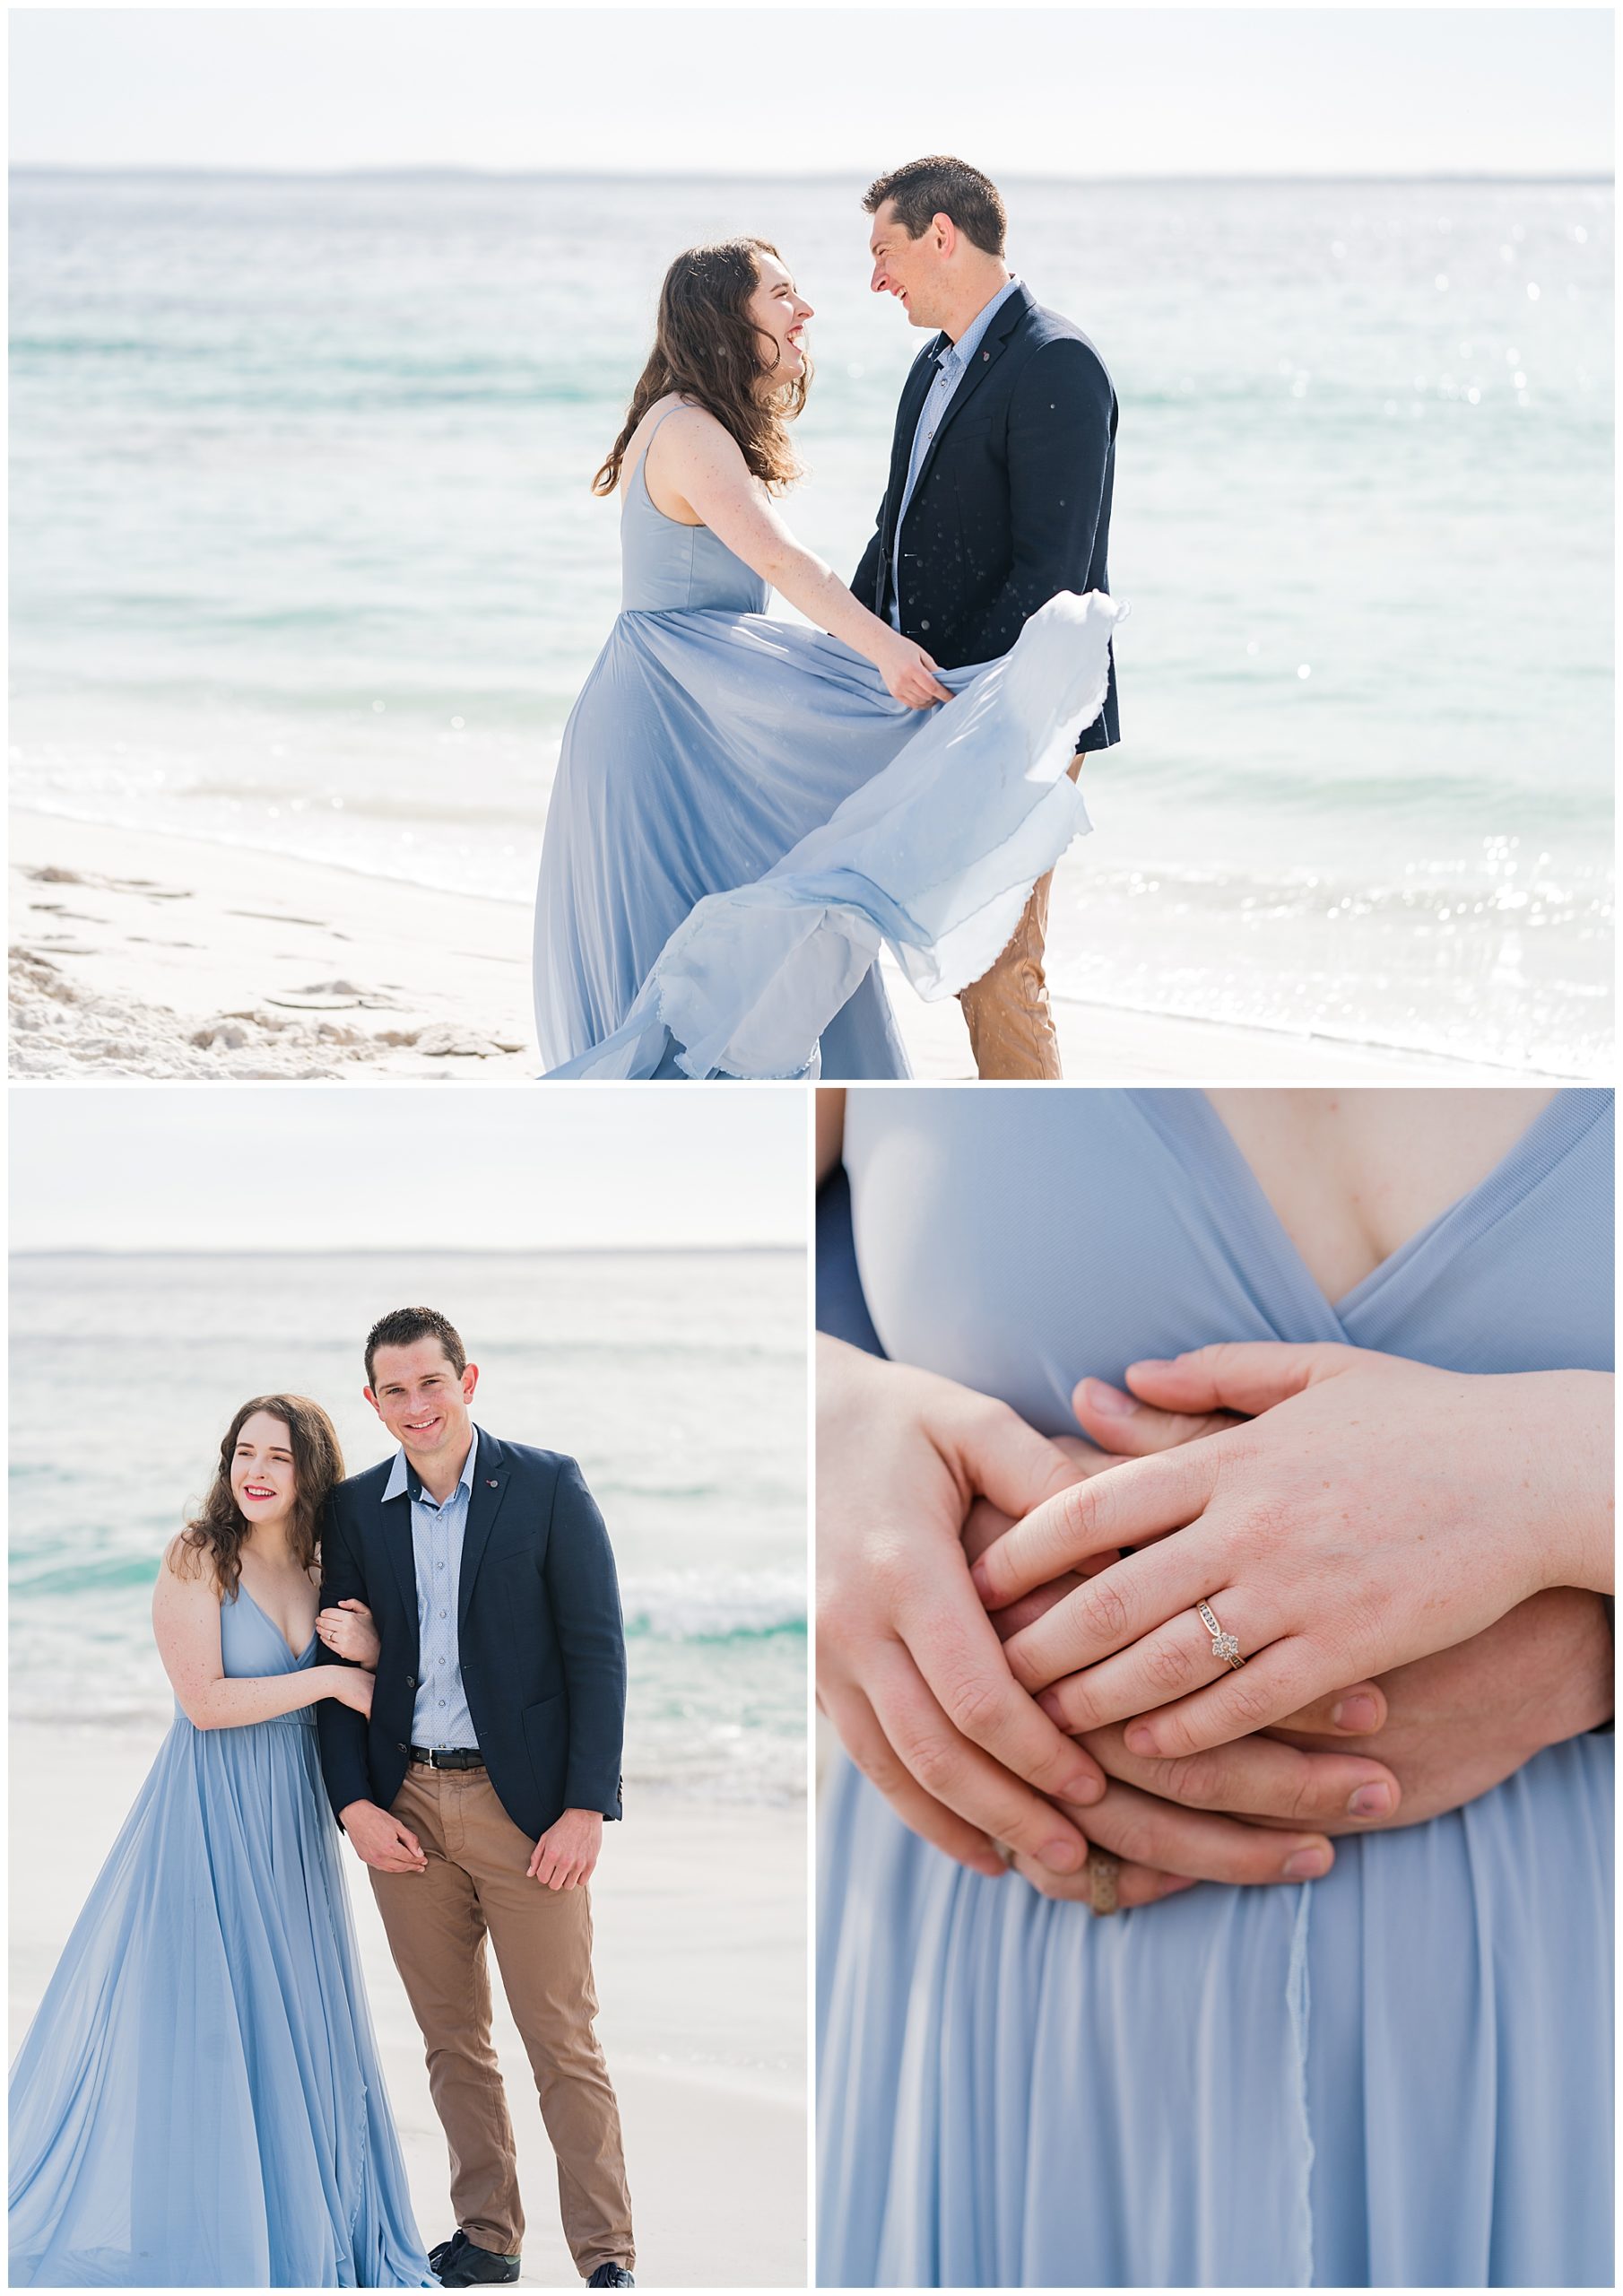 Couple laughing at their Engagement  session on a beach 